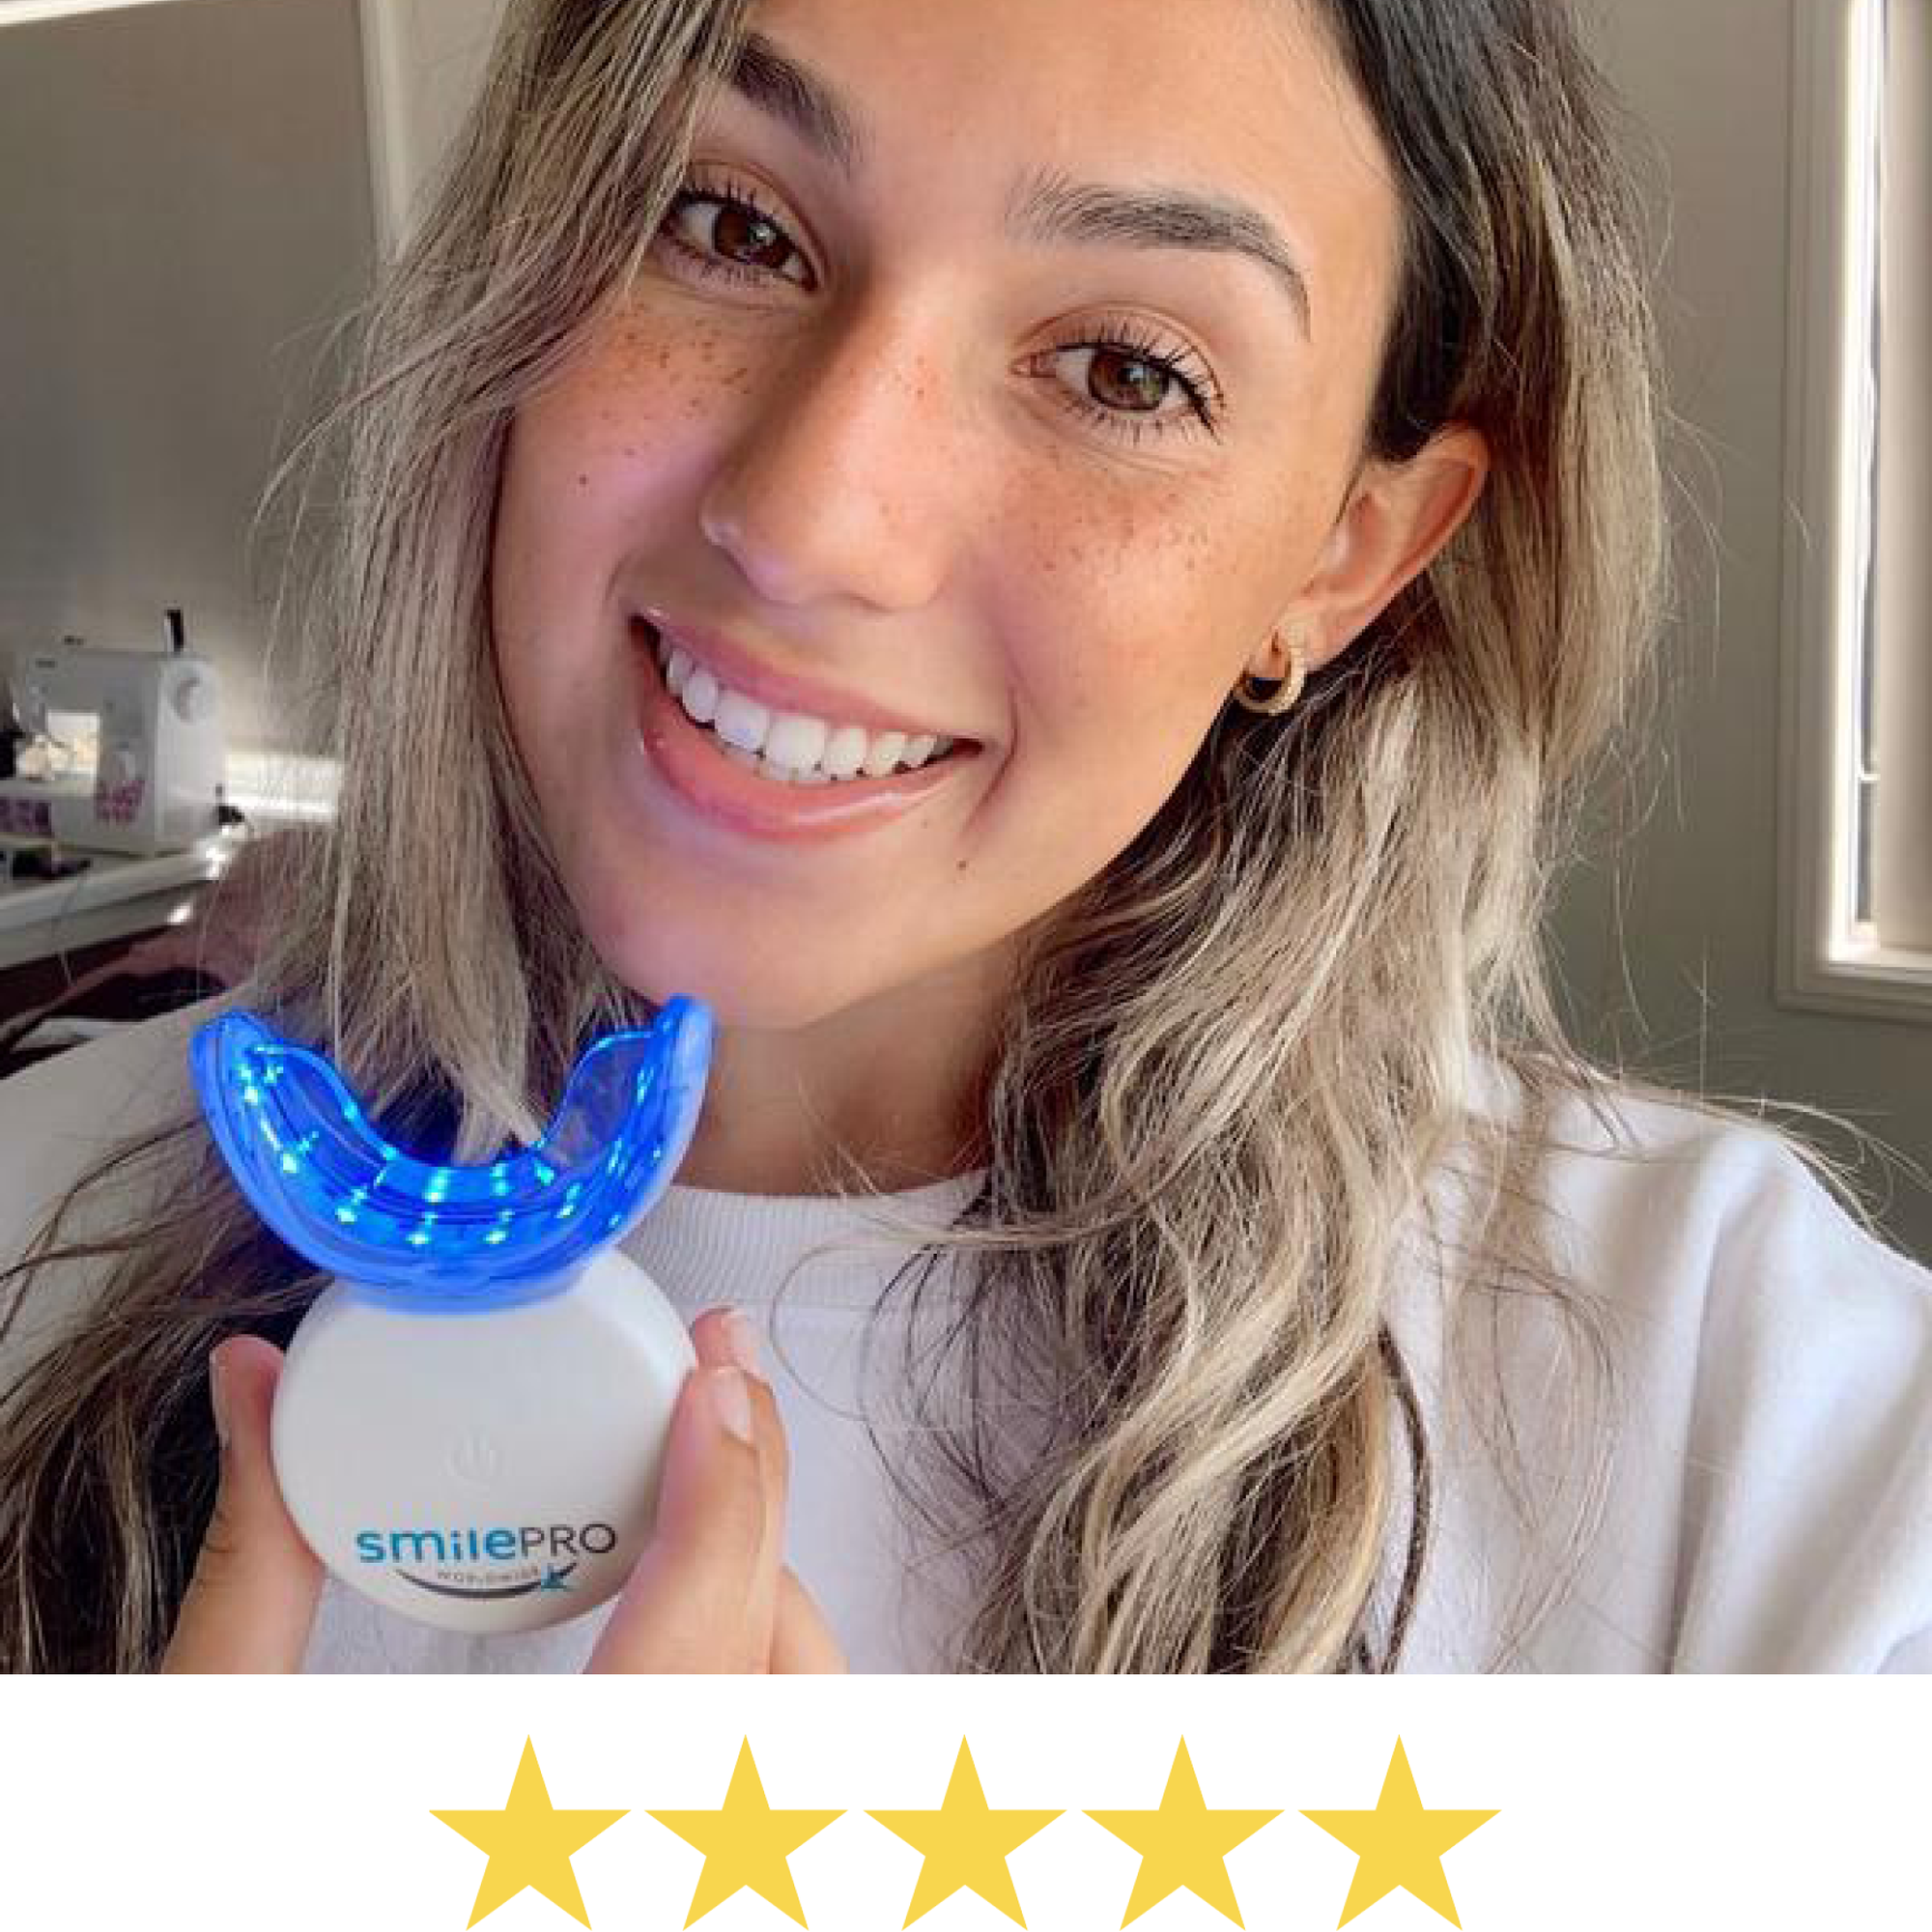 Fast teeth whitening results, verified customer reviews.